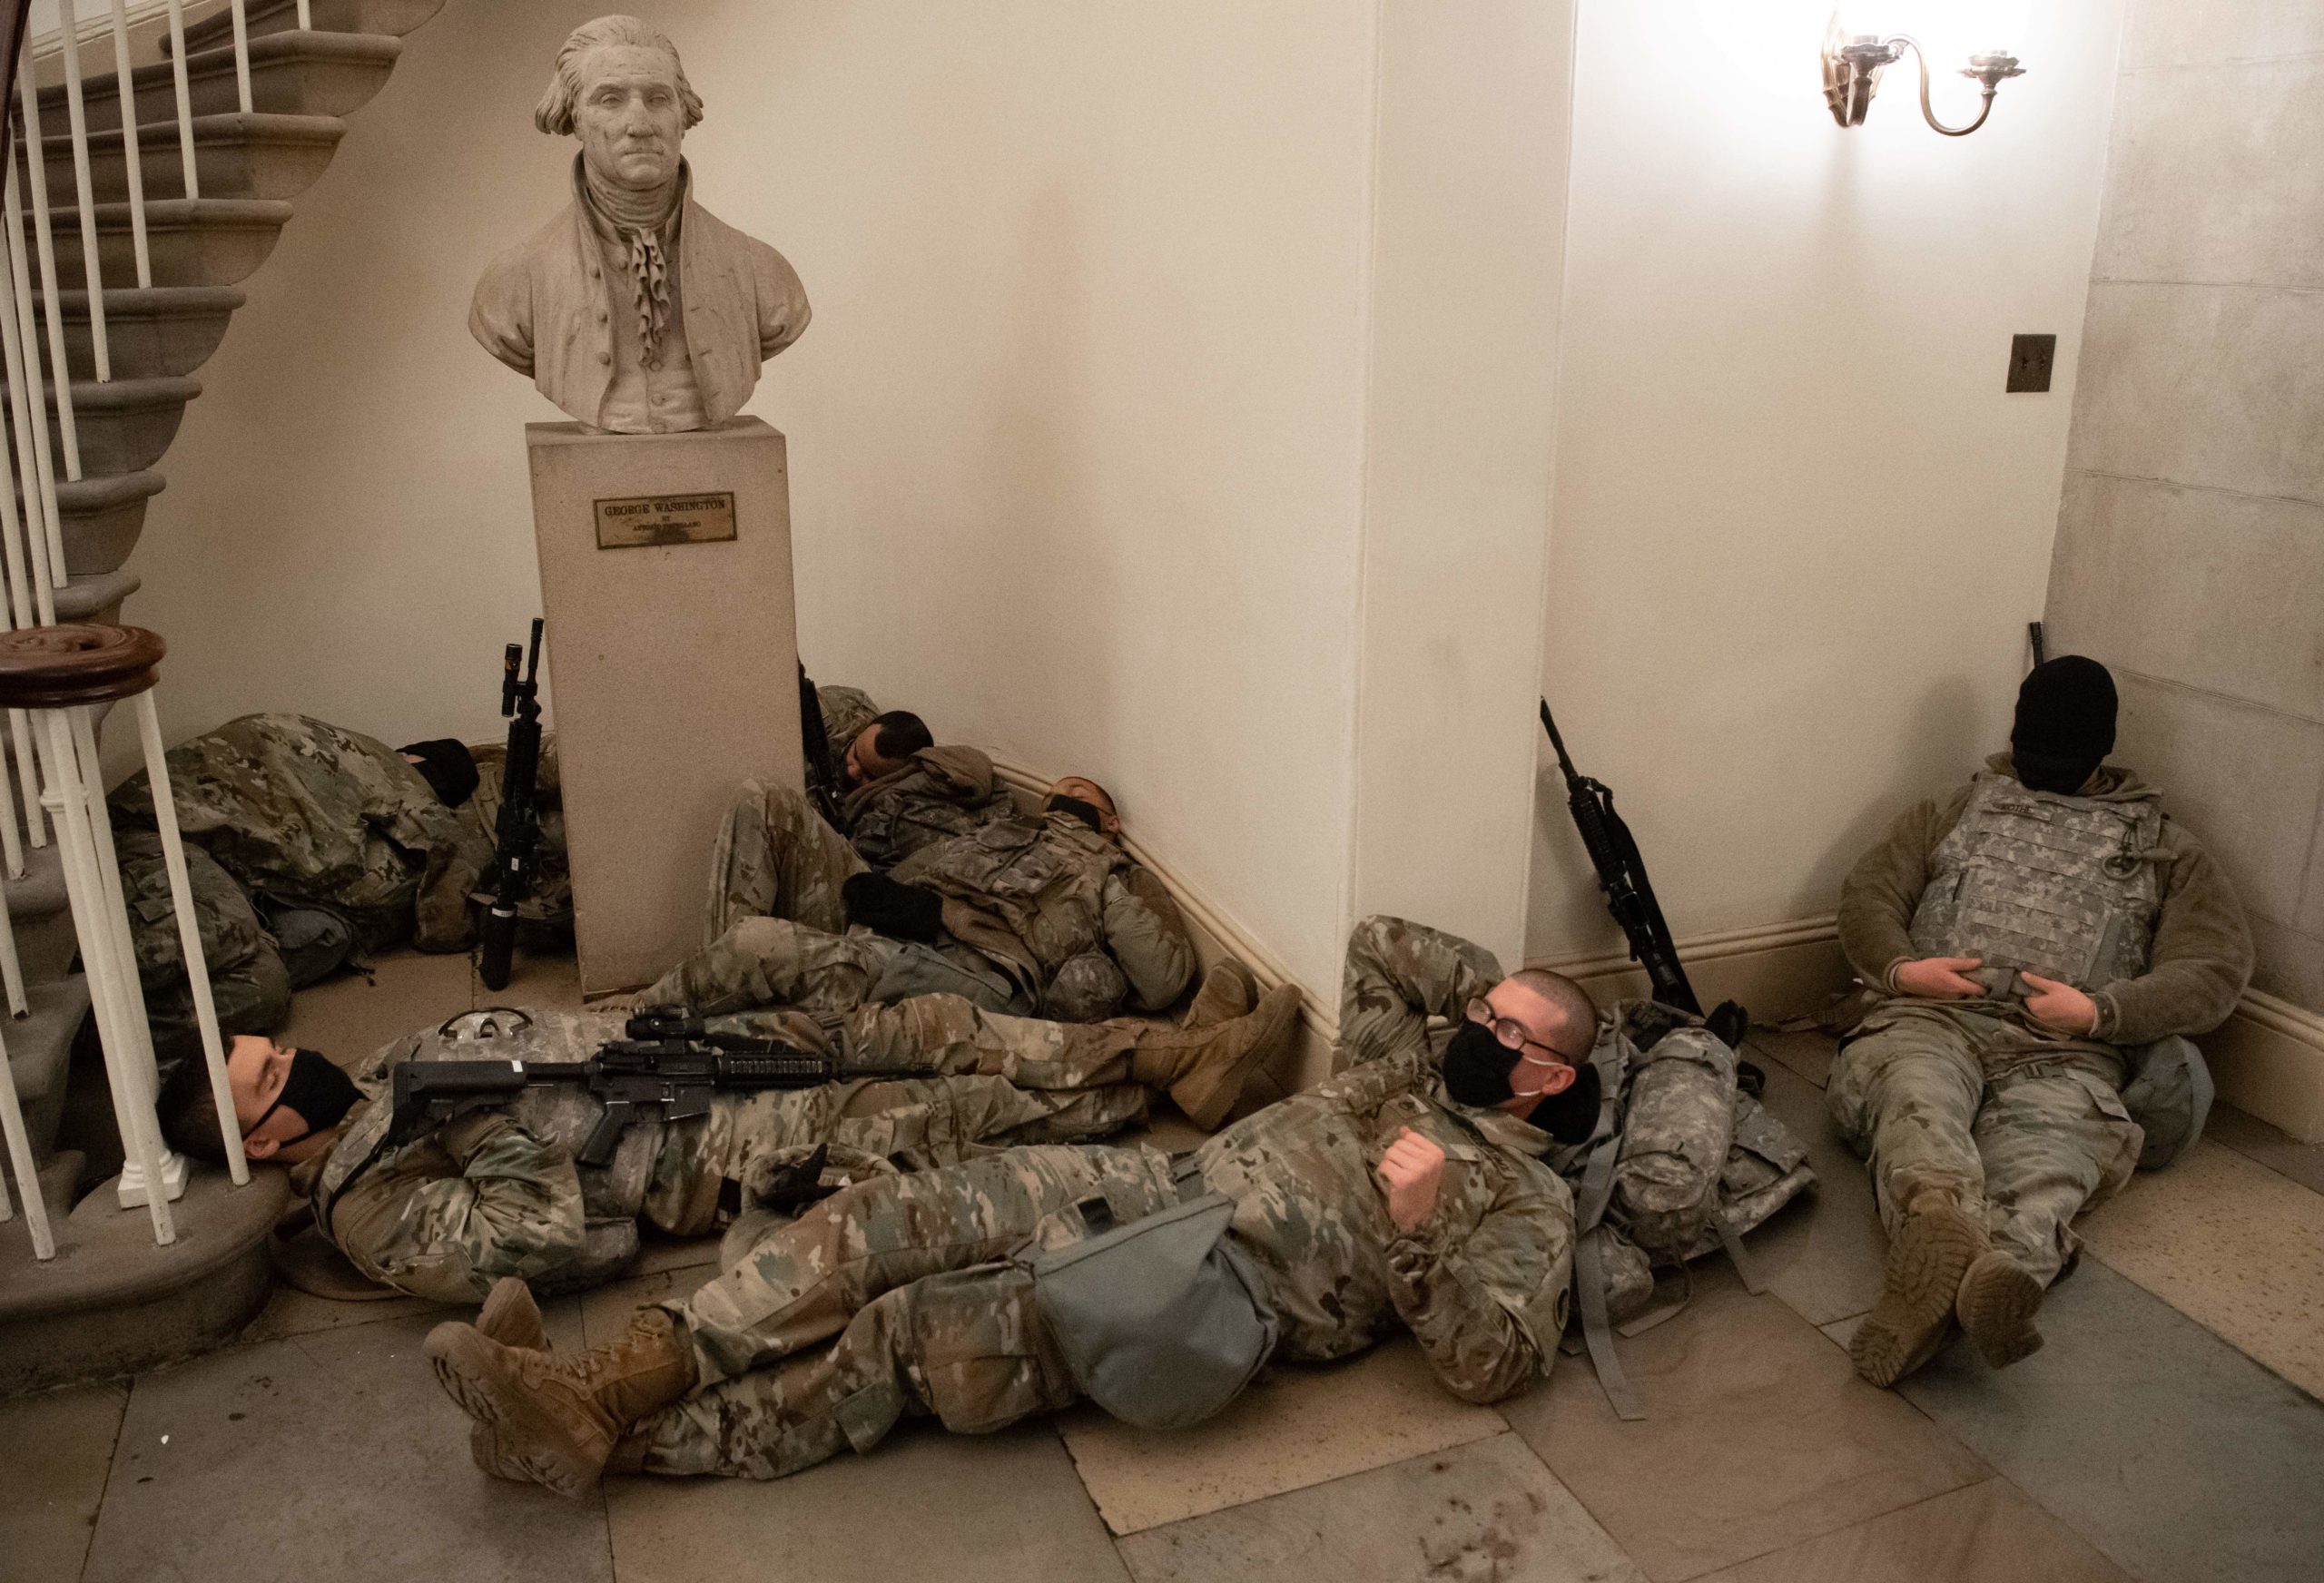 Members of the National Guard take a rest in the Rotunda of the US Capitol in Washington, DC, January 13, 2021, ahead of an expected House vote impeaching US President Donald Trump. - The Democrat-controlled US House of Representatives on Wednesday opened debate on a historic second impeachment of President Donald Trump over his supporters' attack of the Capitol that left five dead.Lawmakers in the lower chamber are expected to vote for impeachment around 3:00 pm (2000 GMT) -- marking the formal opening of proceedings against Trump. (Photo by Saul Loeb/AFP via Getty Images)